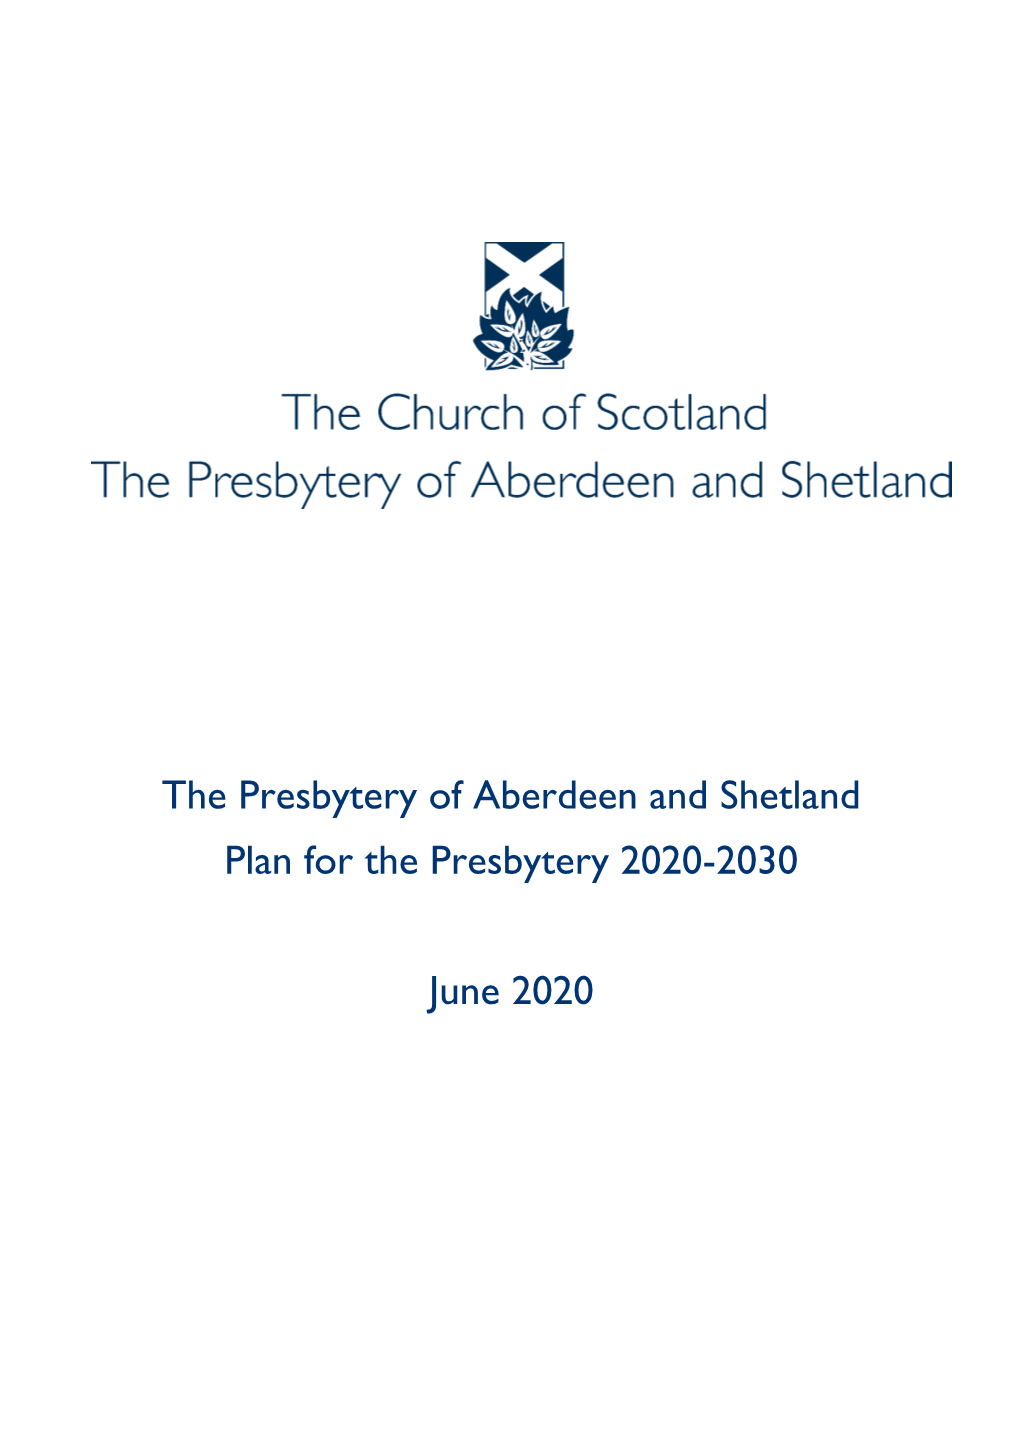 The Presbytery of Aberdeen and Shetland Plan for the Presbytery 2020-2030